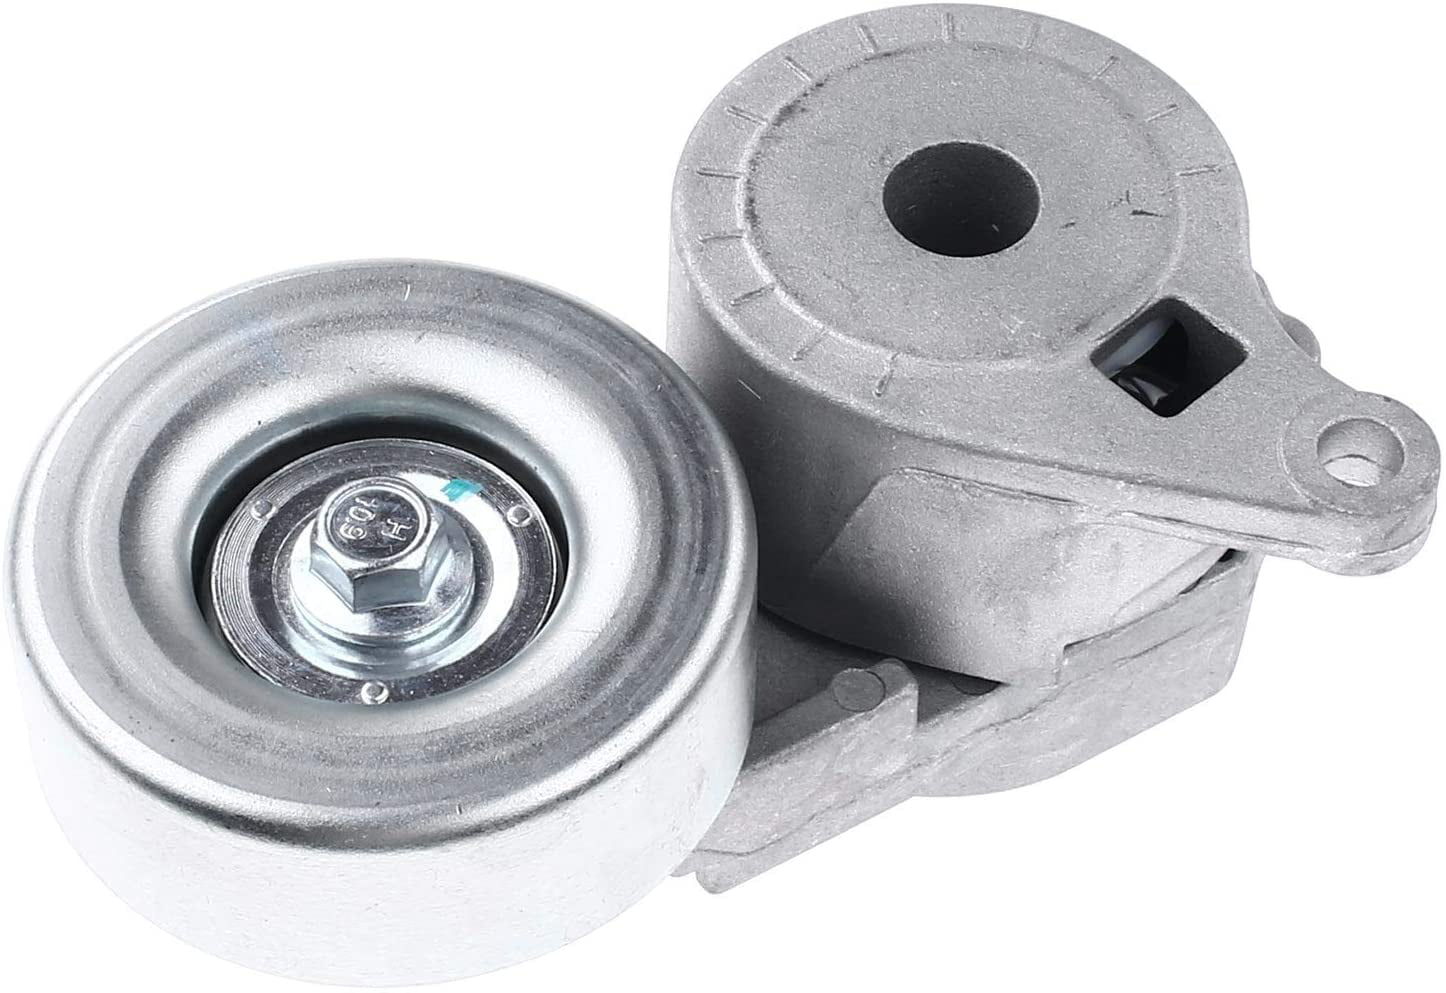 A-Premium Serpentine Belt Tensioner Assembly with Idler Pulley Compatible with Mitsubishi Eclipse 2006-2012 Galant 2004-2012 Lancer 2003-2006 Outlander 2003-2006 